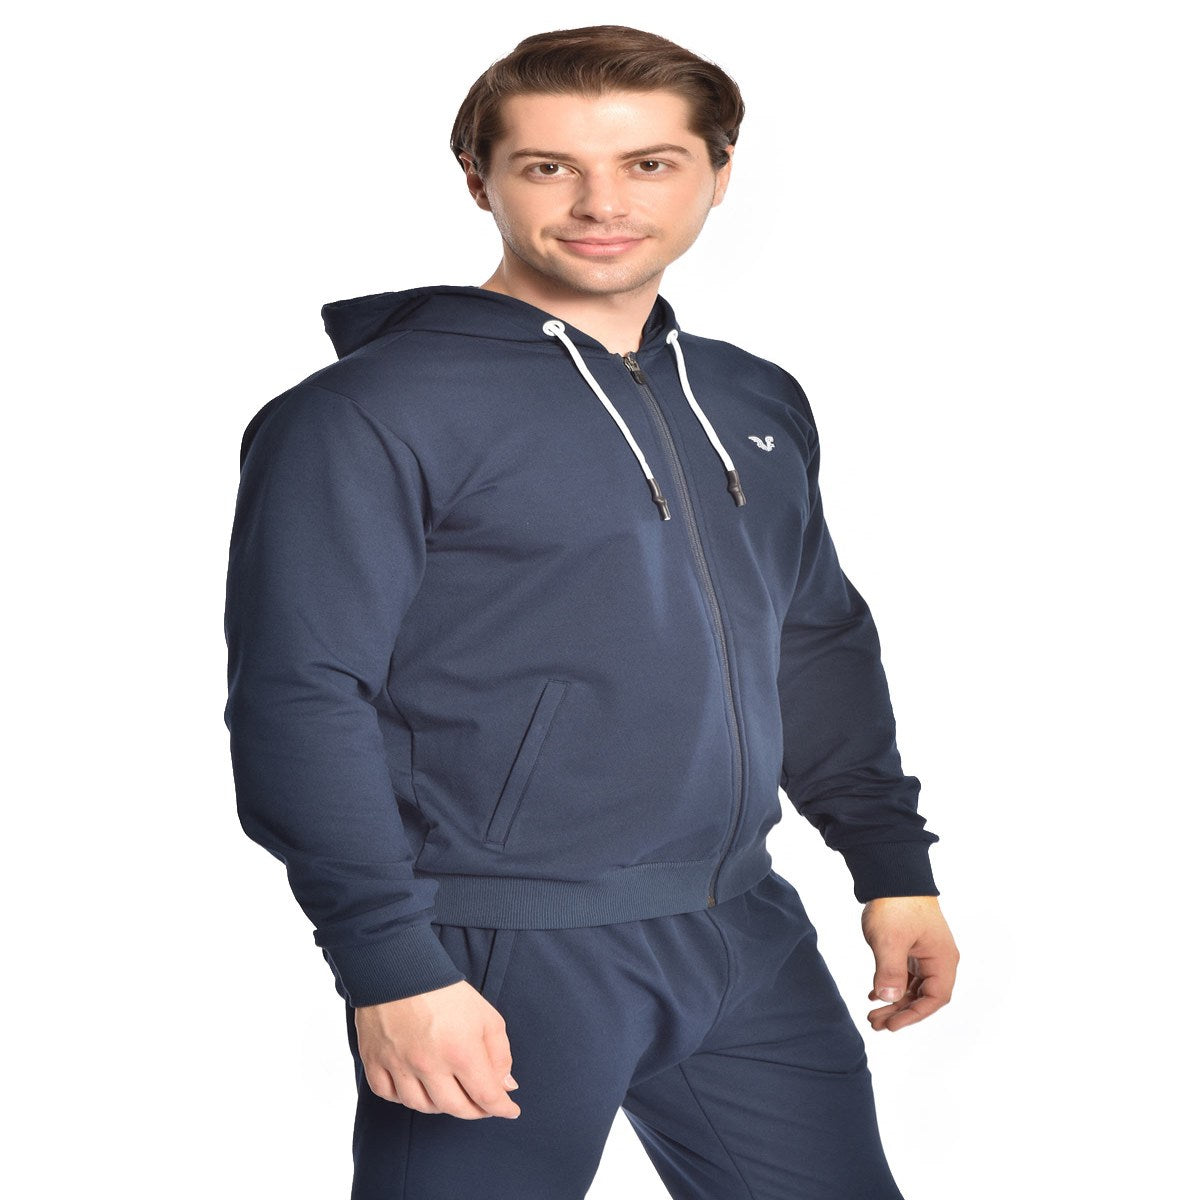 BILCEE MEN'S TRACKSUIT FOR TRANING-2101S8769-1-1002